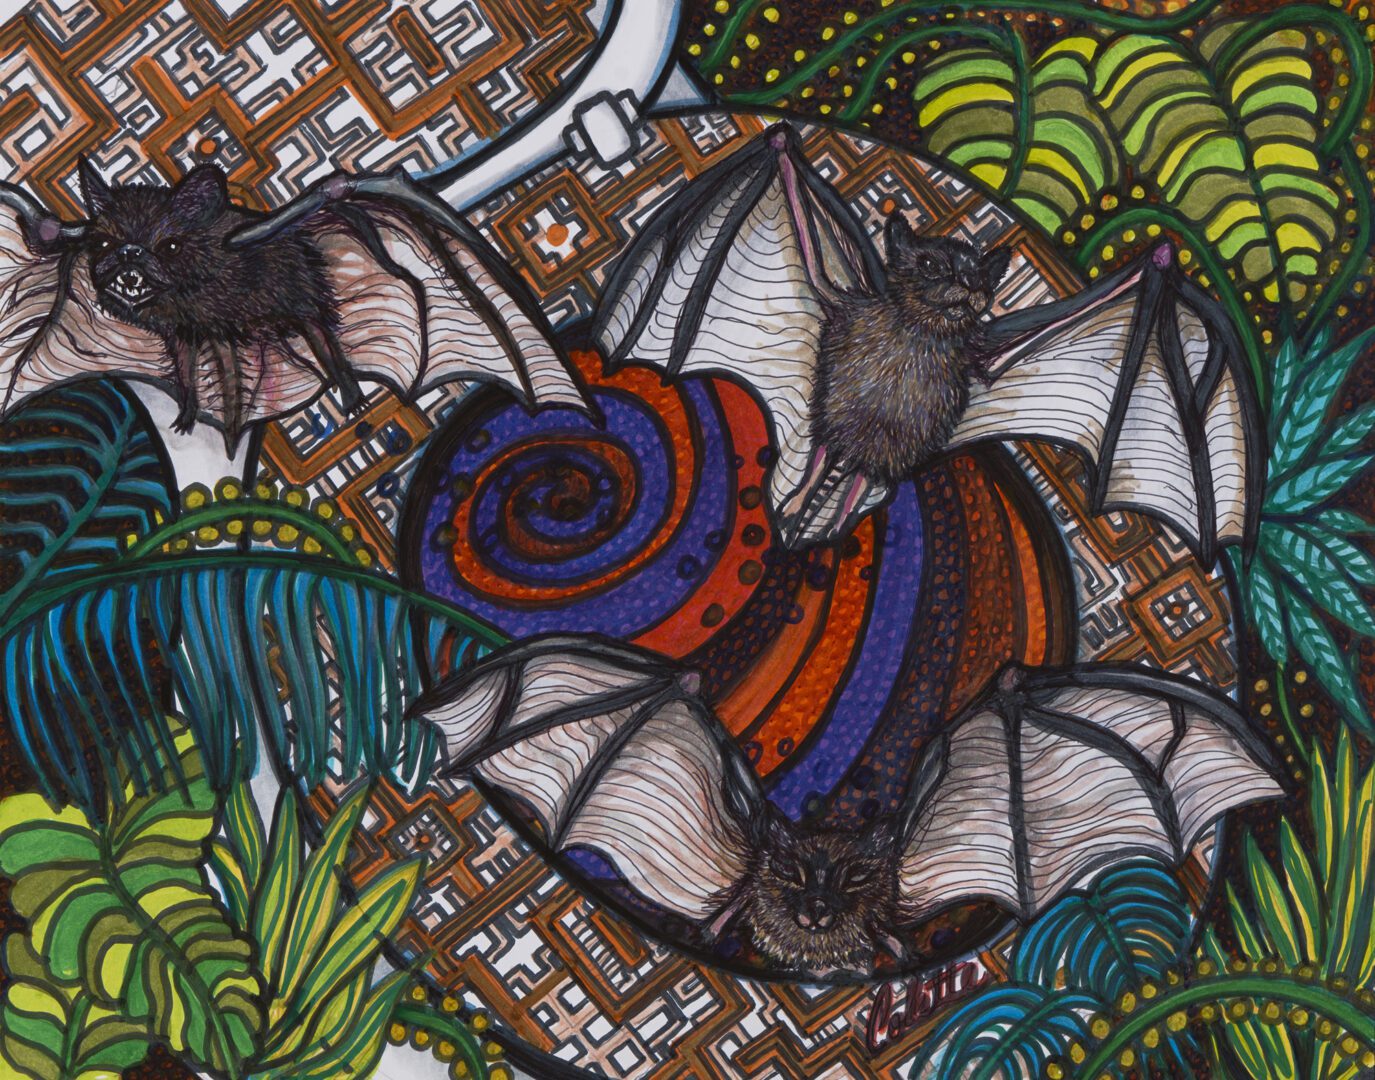 A painting of bats flying in the air.